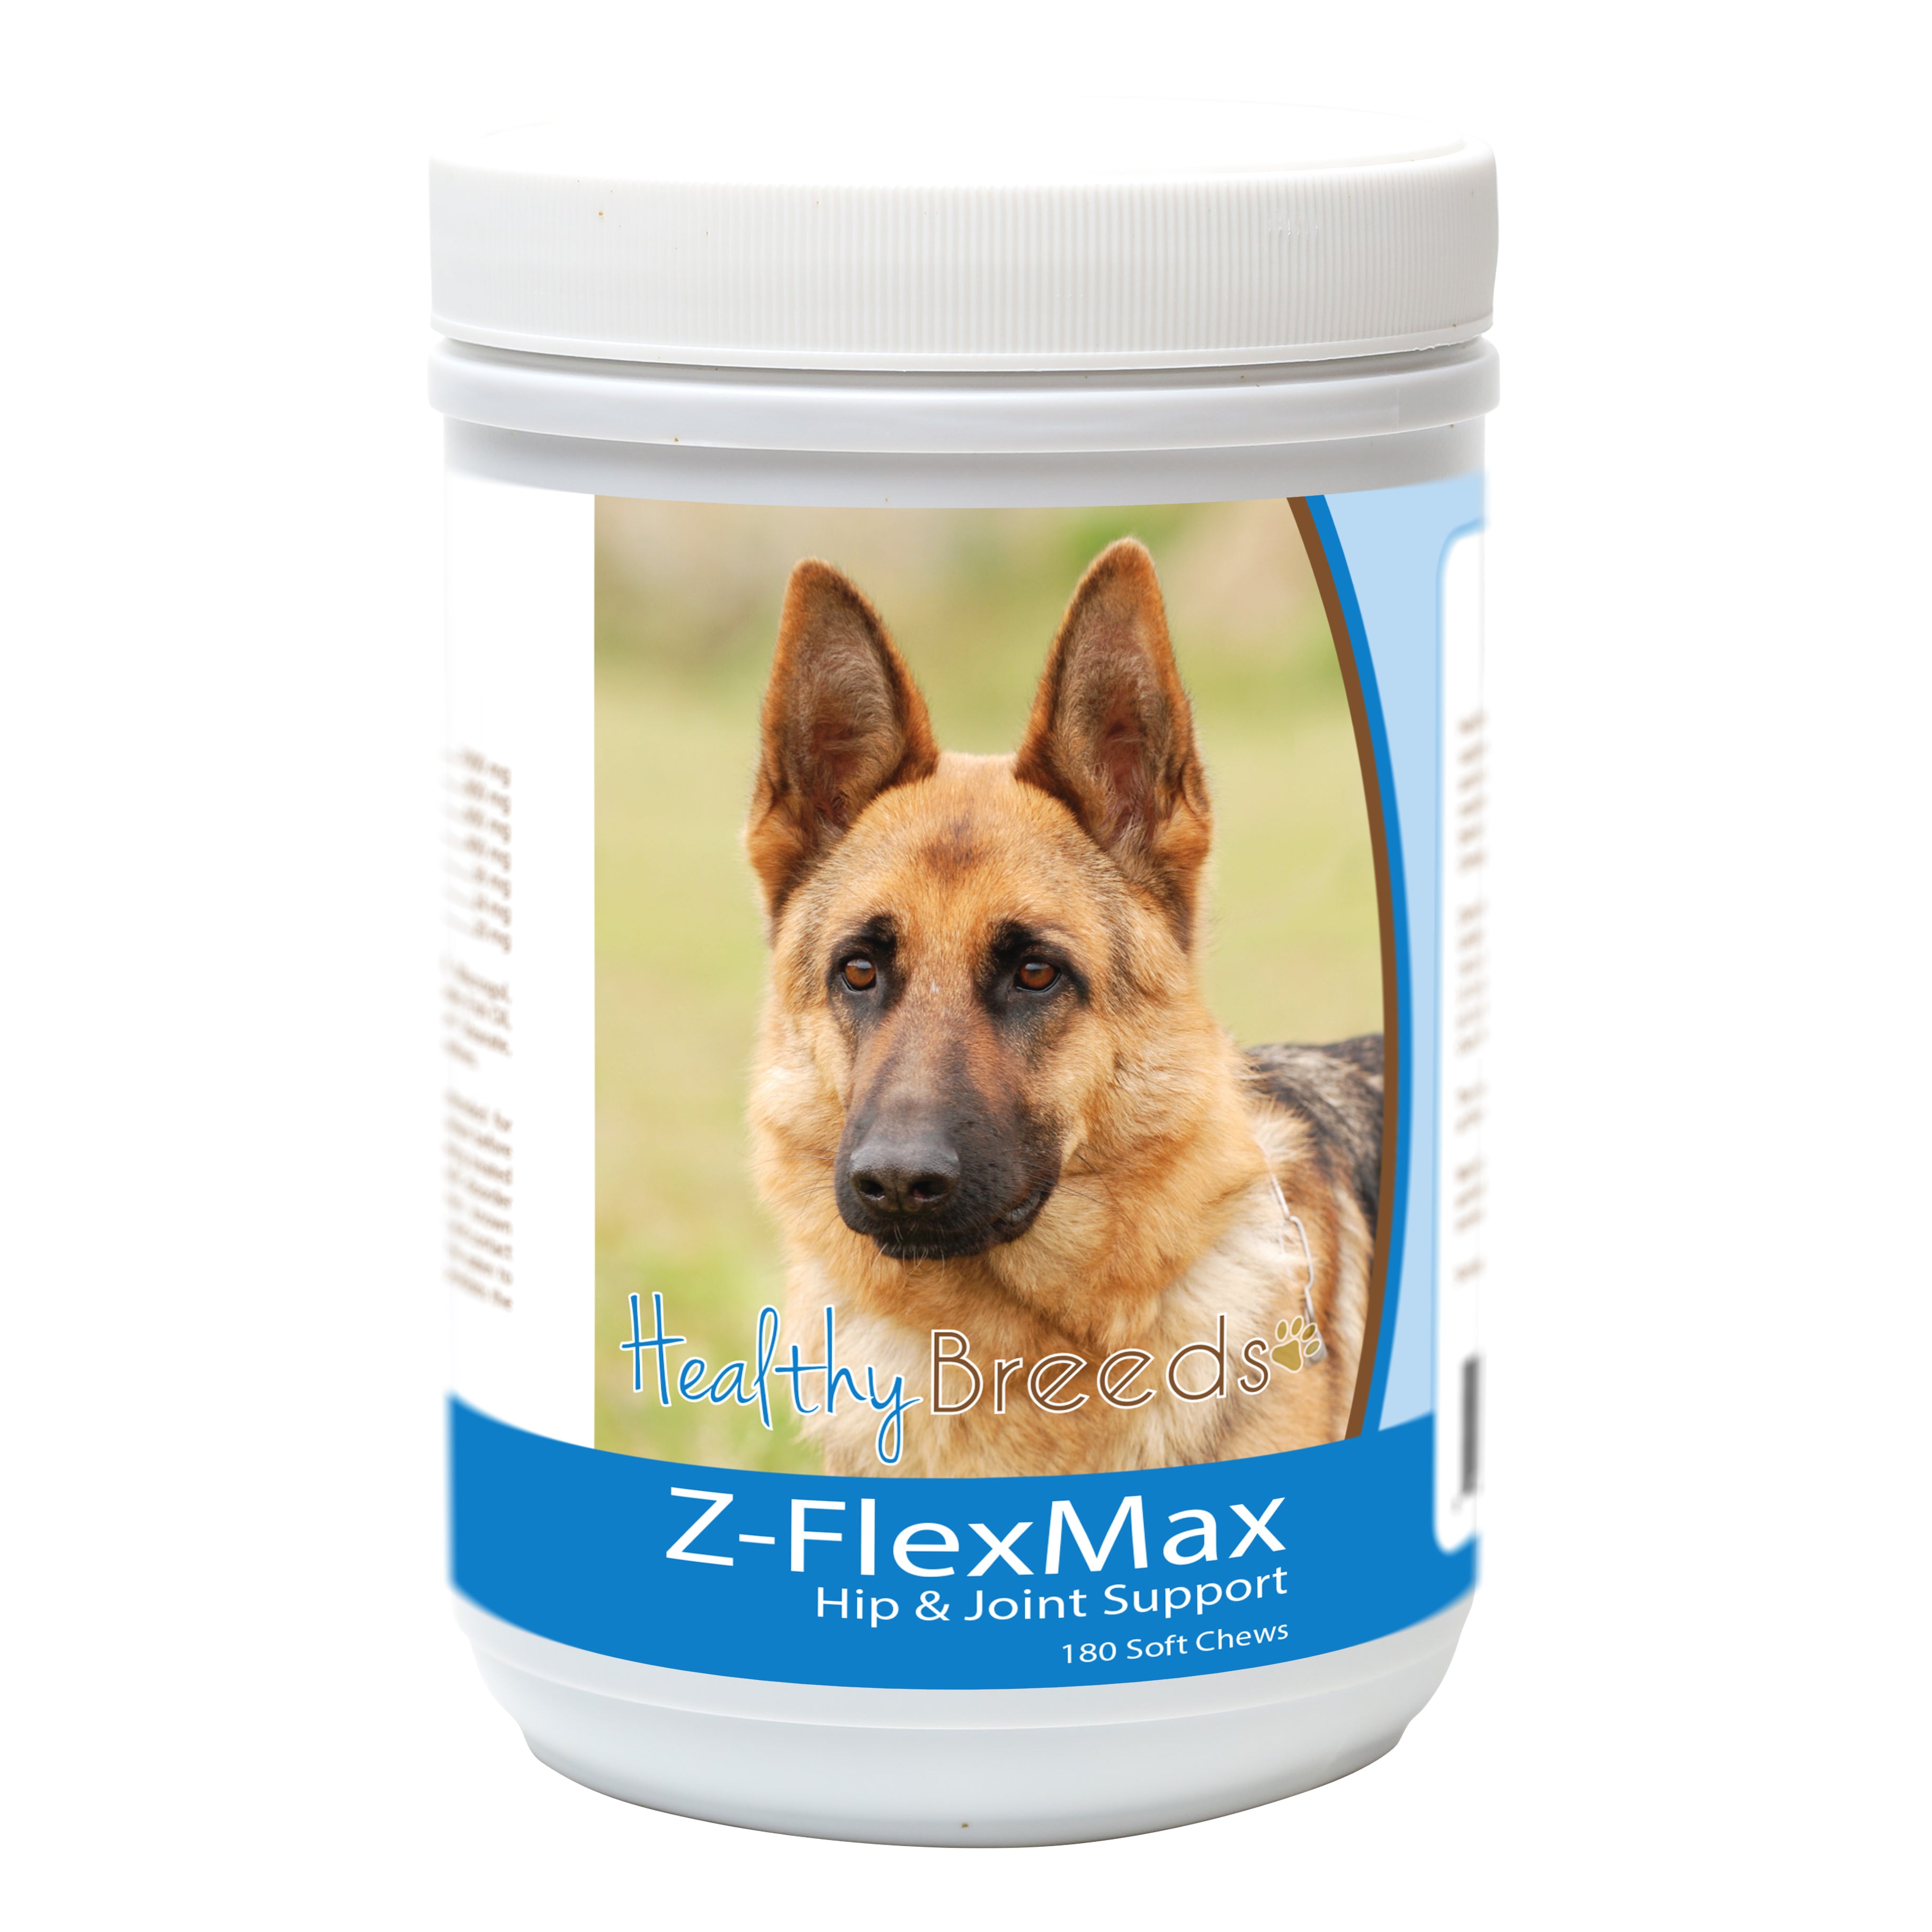 German Shepherd Z-Flex Max Dog Hip and Joint Support 180 Count